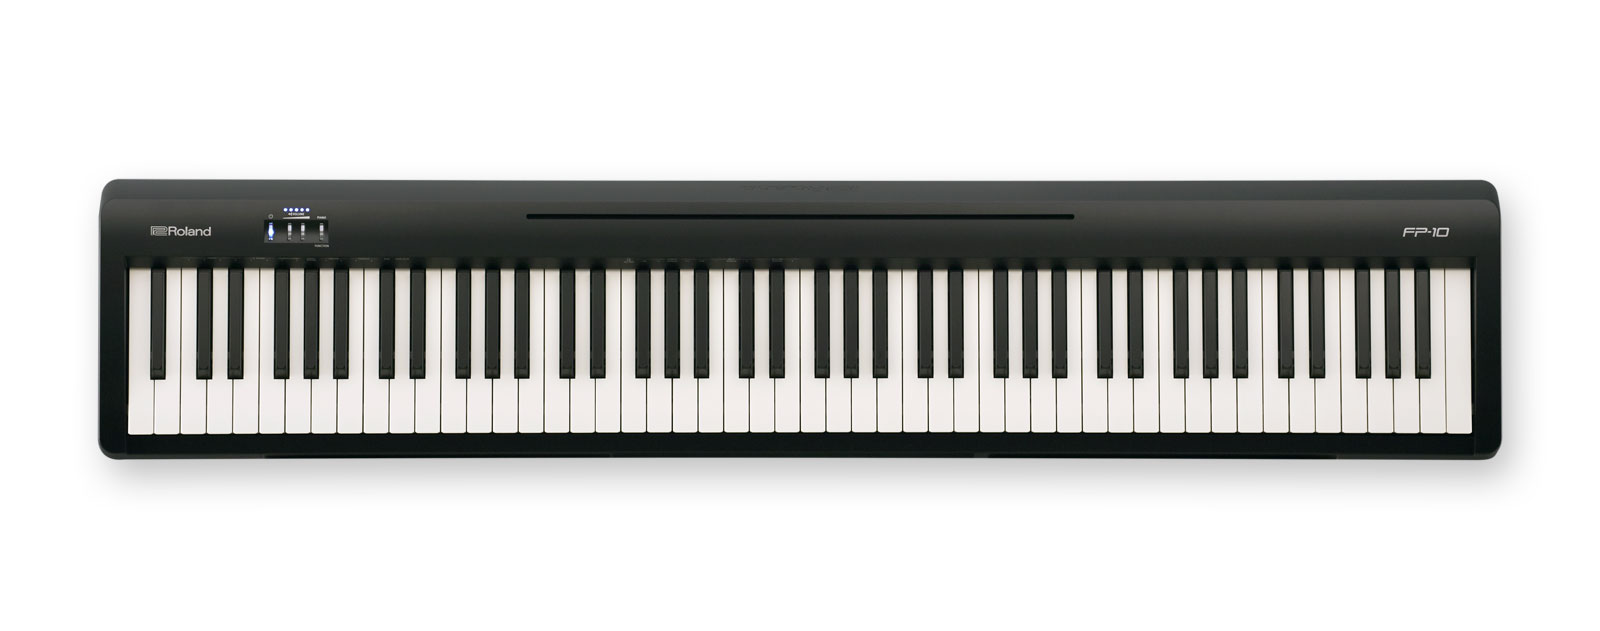 Public Peace - ROLAND FP-10 Stage Piano